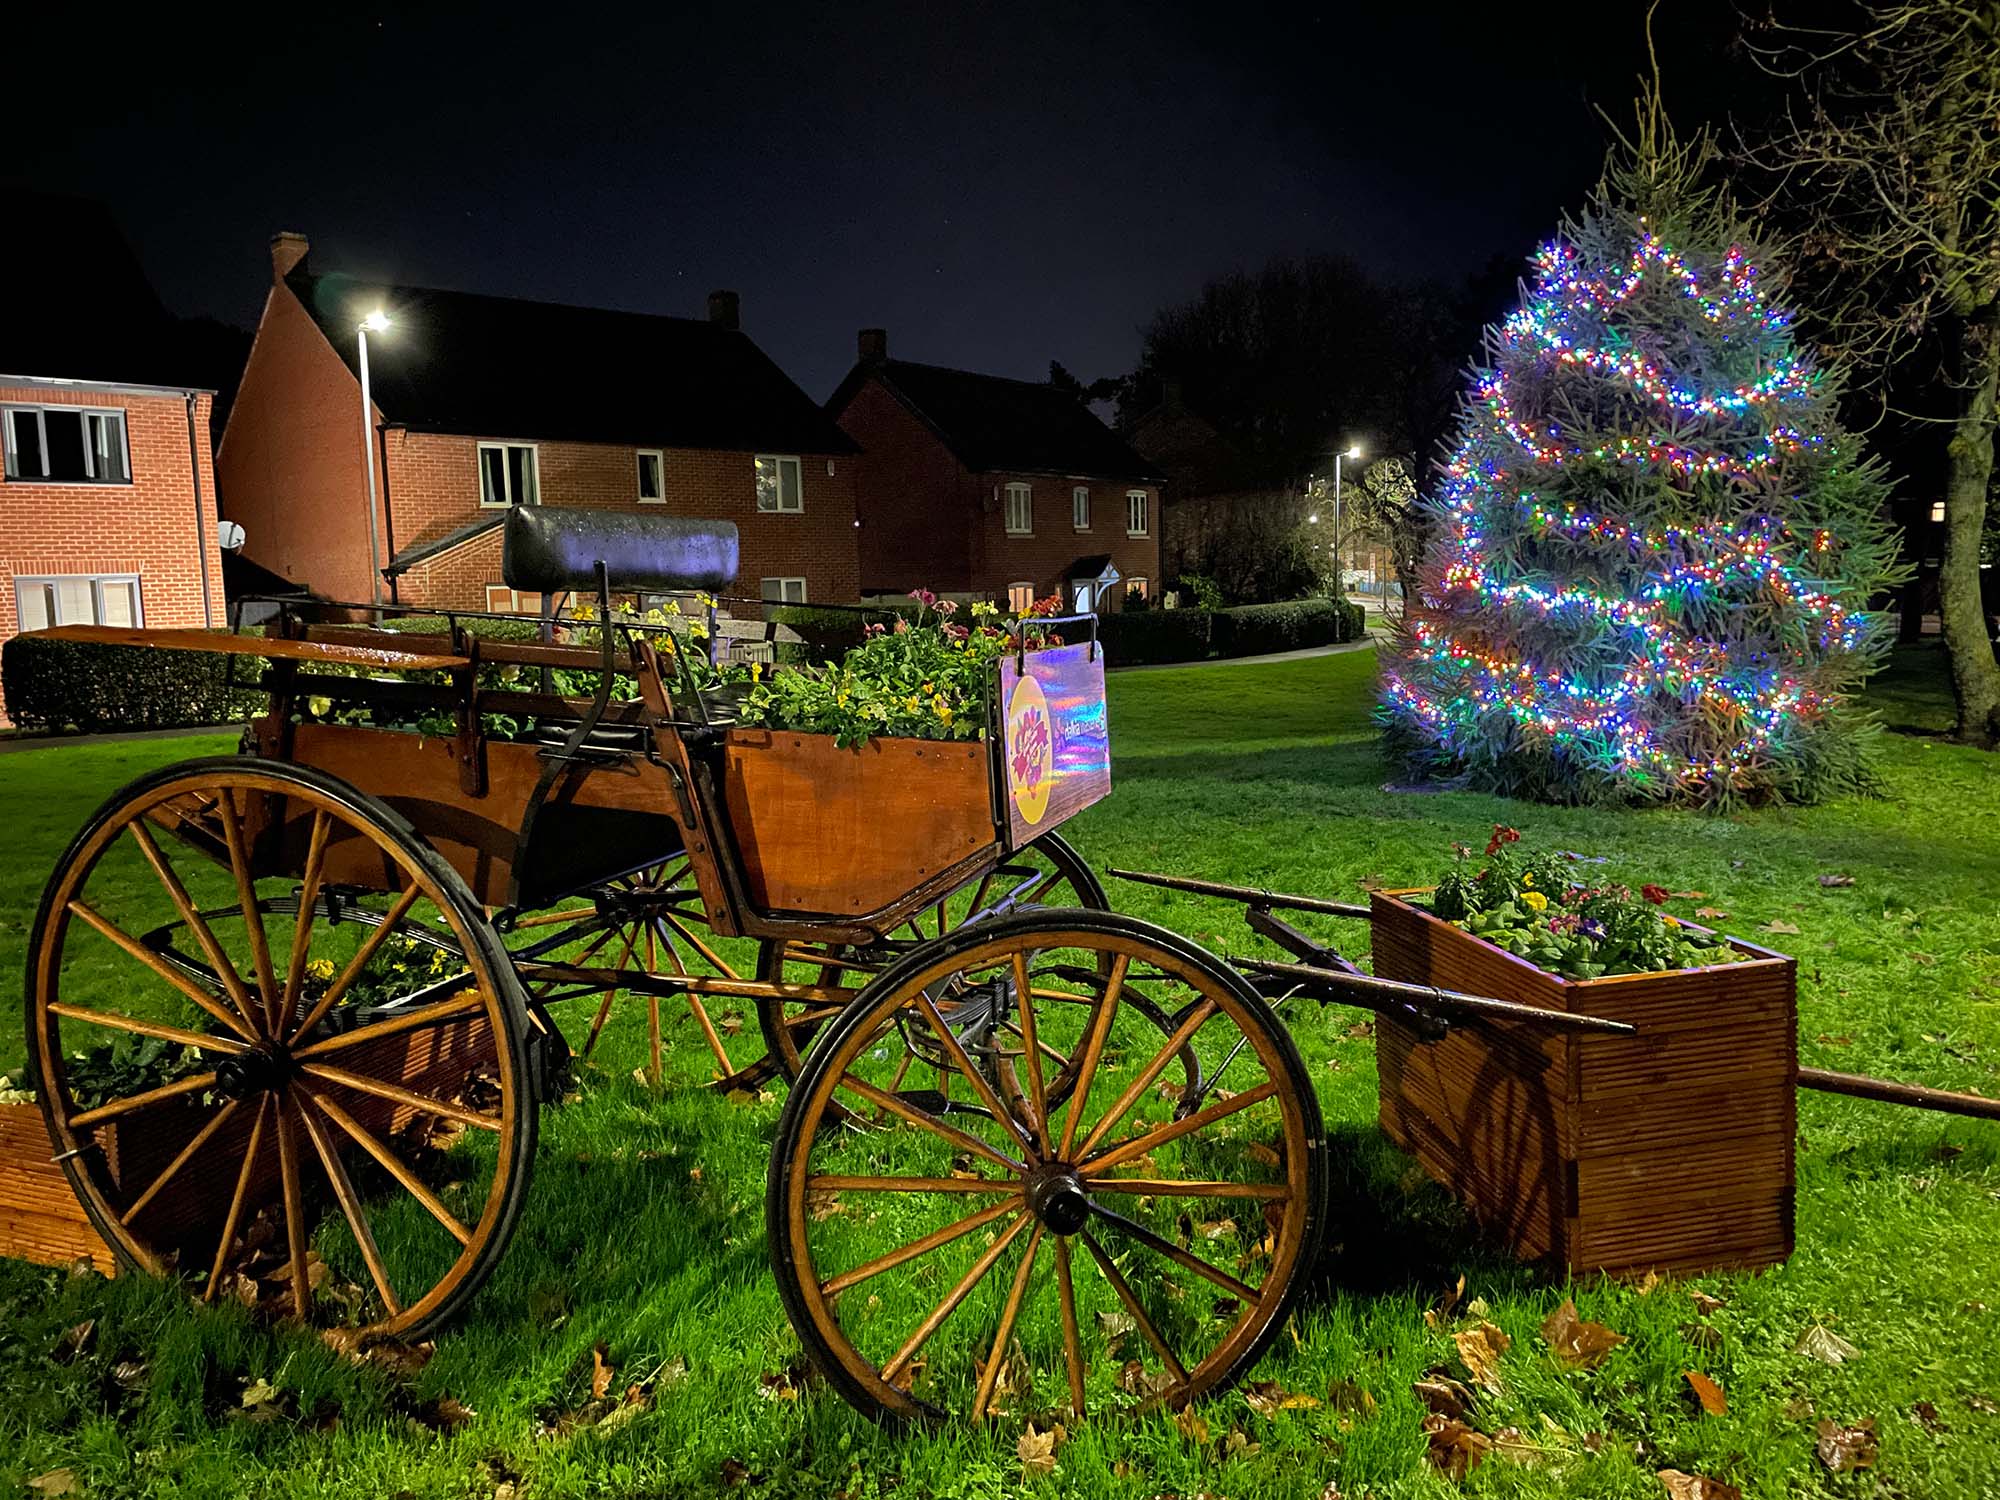 a refurbished pony cart, now used as a flower planter, with a Christmas tree in the background draped in lights